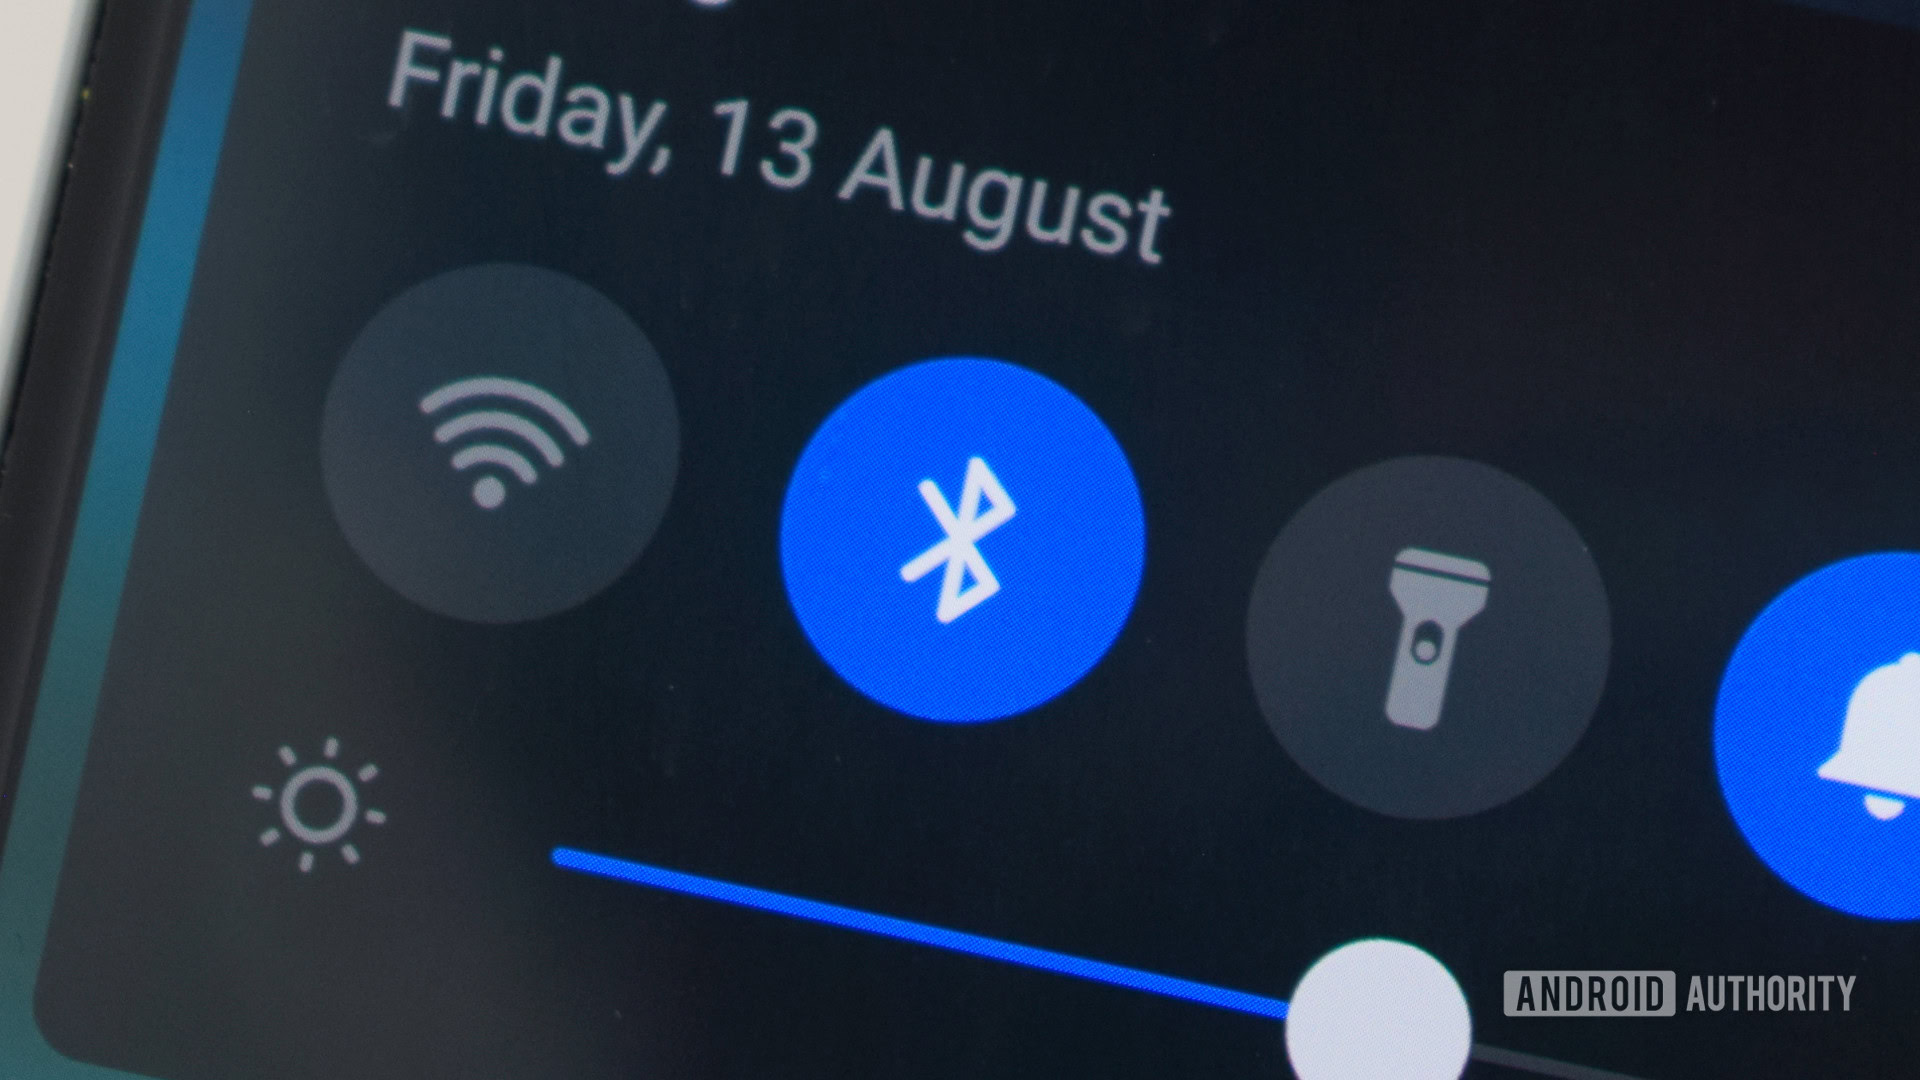 Bluetooth connection problems? Here are 11 fixes - Android Authority